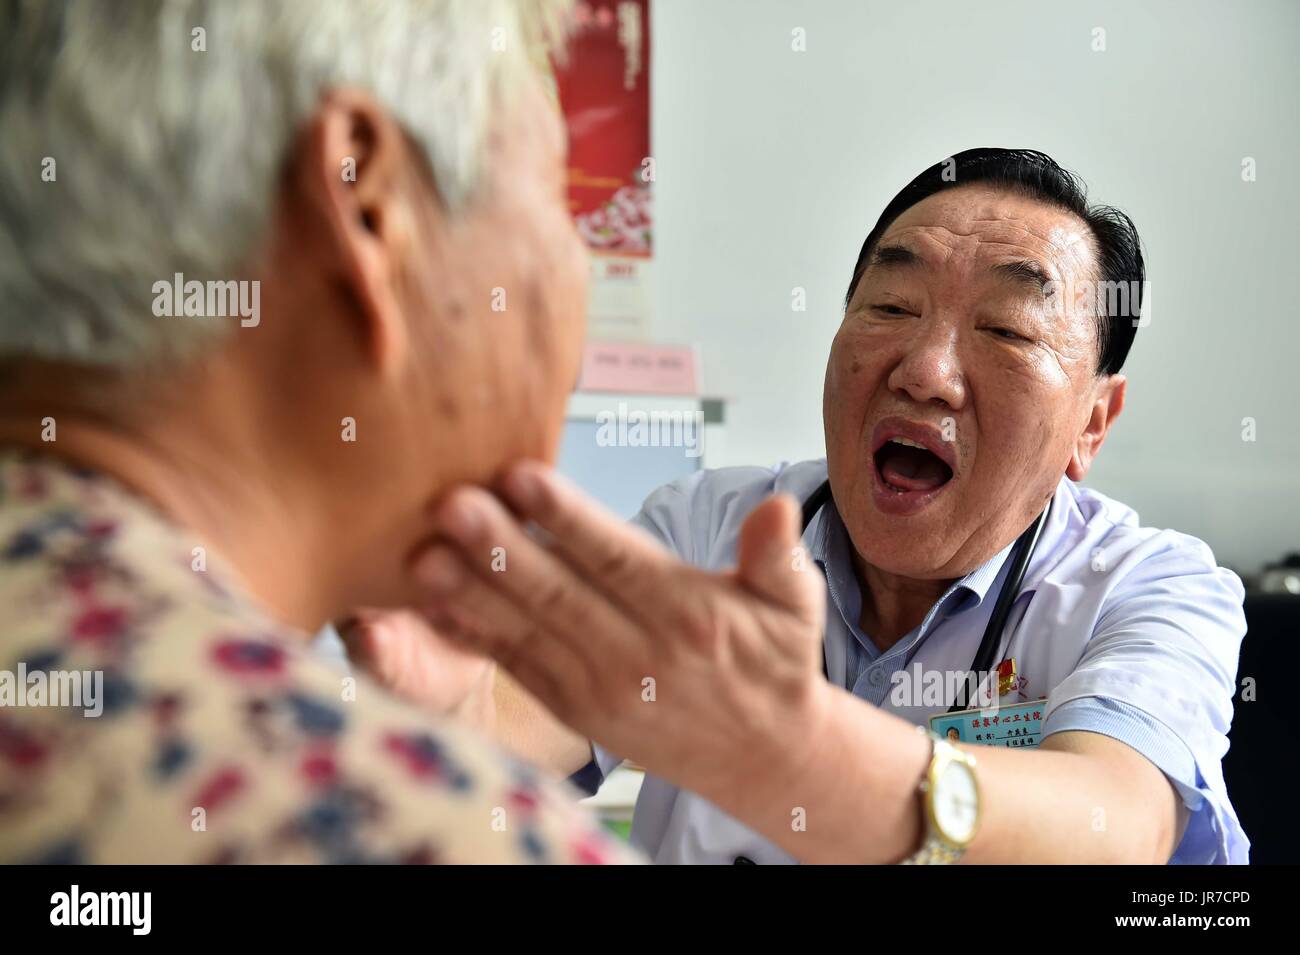 (170804) -- JINAN, Aug. 4, 2017 (Xinhua) -- Qi Qingliang, President of Yuanquan Central Health Center of Boshan District diagnoses a patient in Zibo, east China's Shandong Province, Aug. 3, 2017. 65-year-old Qi Qingliang, the representative of the 19th National Congress of the Communist Party of China(CPC), has worked hard every day to help the patients. When he graduated from university in 1978, he had the chance to stay at the school but he refused it and returned to Boshan District Hospital which located in the mountain area of his hometown. In 1997, as one of the top 10 famous doctors in Stock Photo